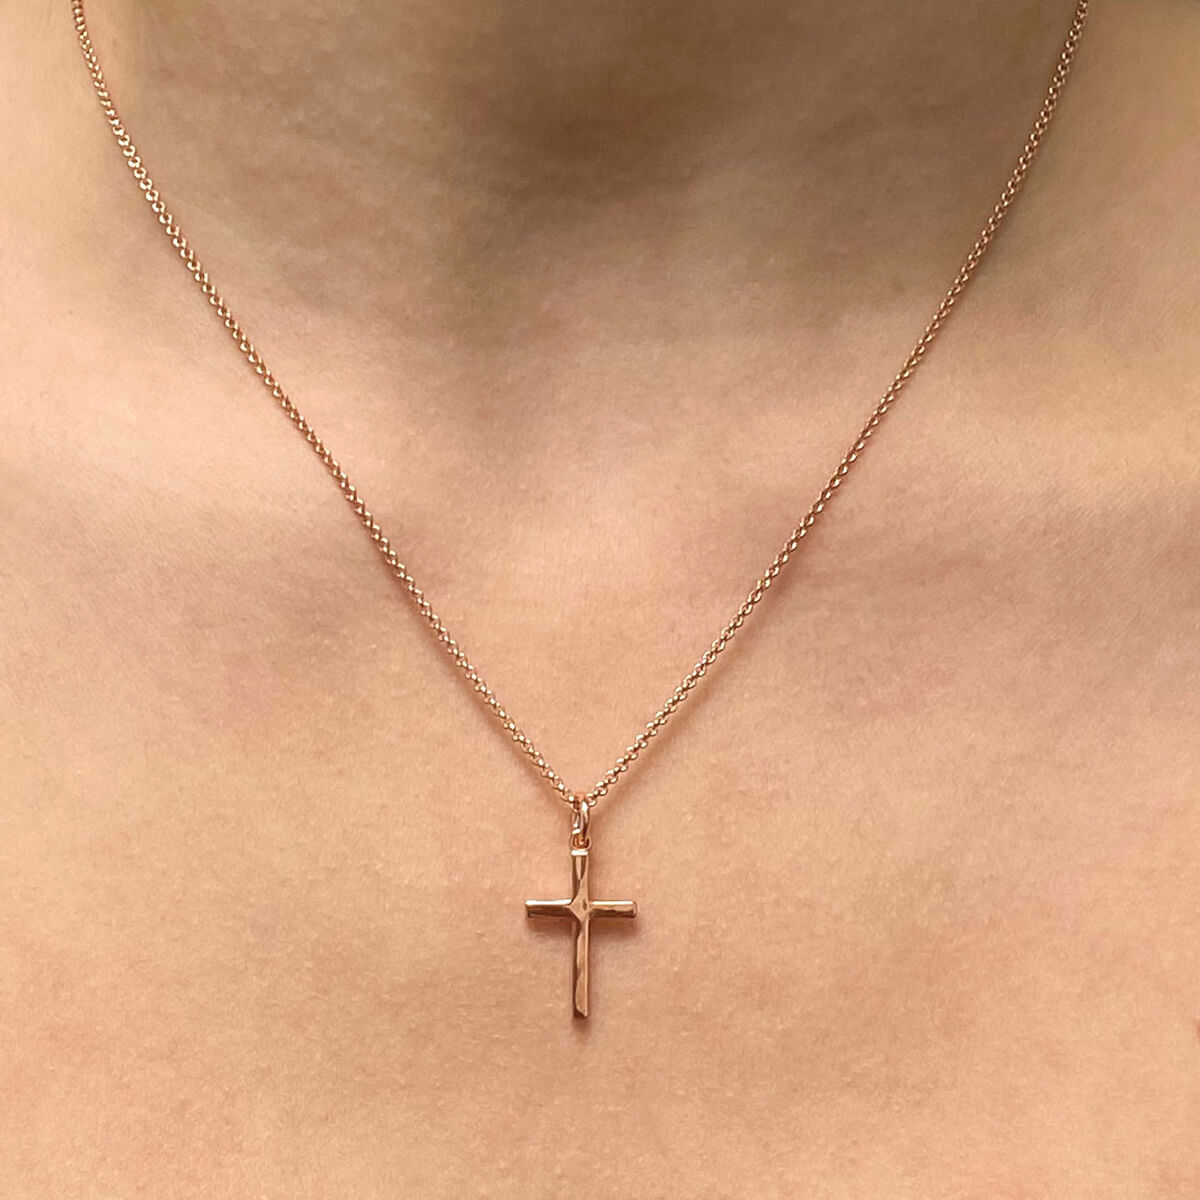 Simple Cross Necklace Sterling Silver Jewelry